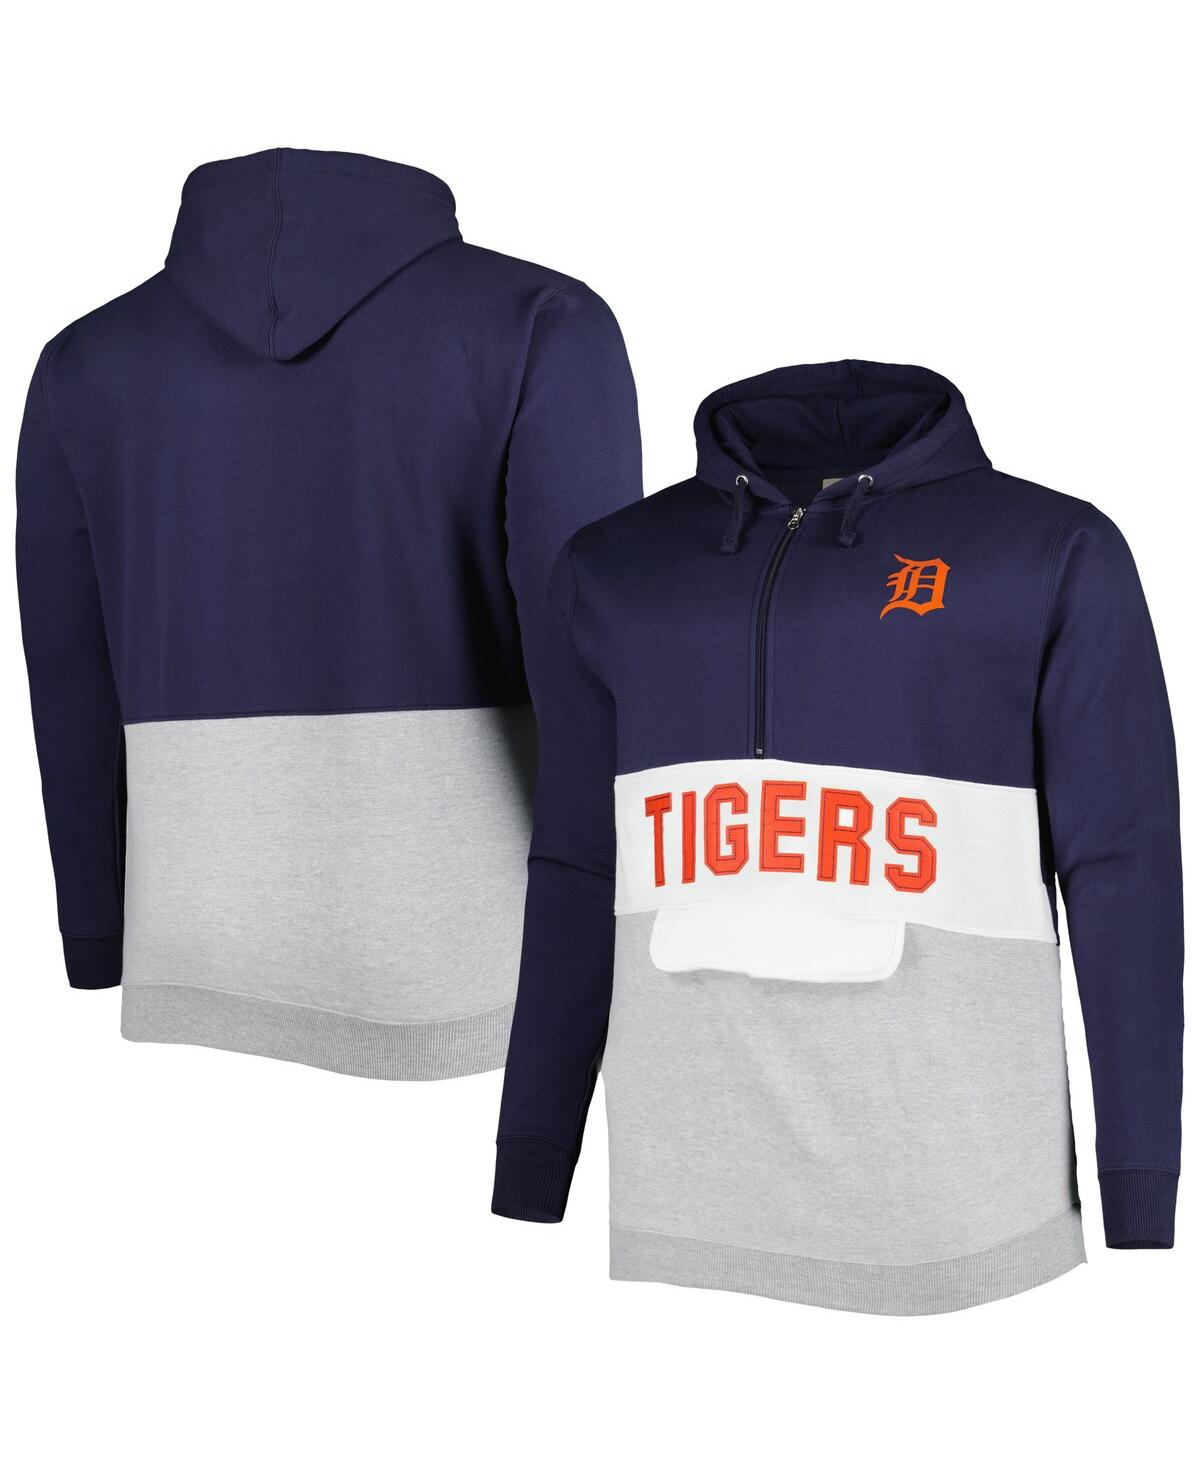 Men's Navy and White Detroit Tigers Big and Tall Fleece Half-Zip Hoodie - Navy, White